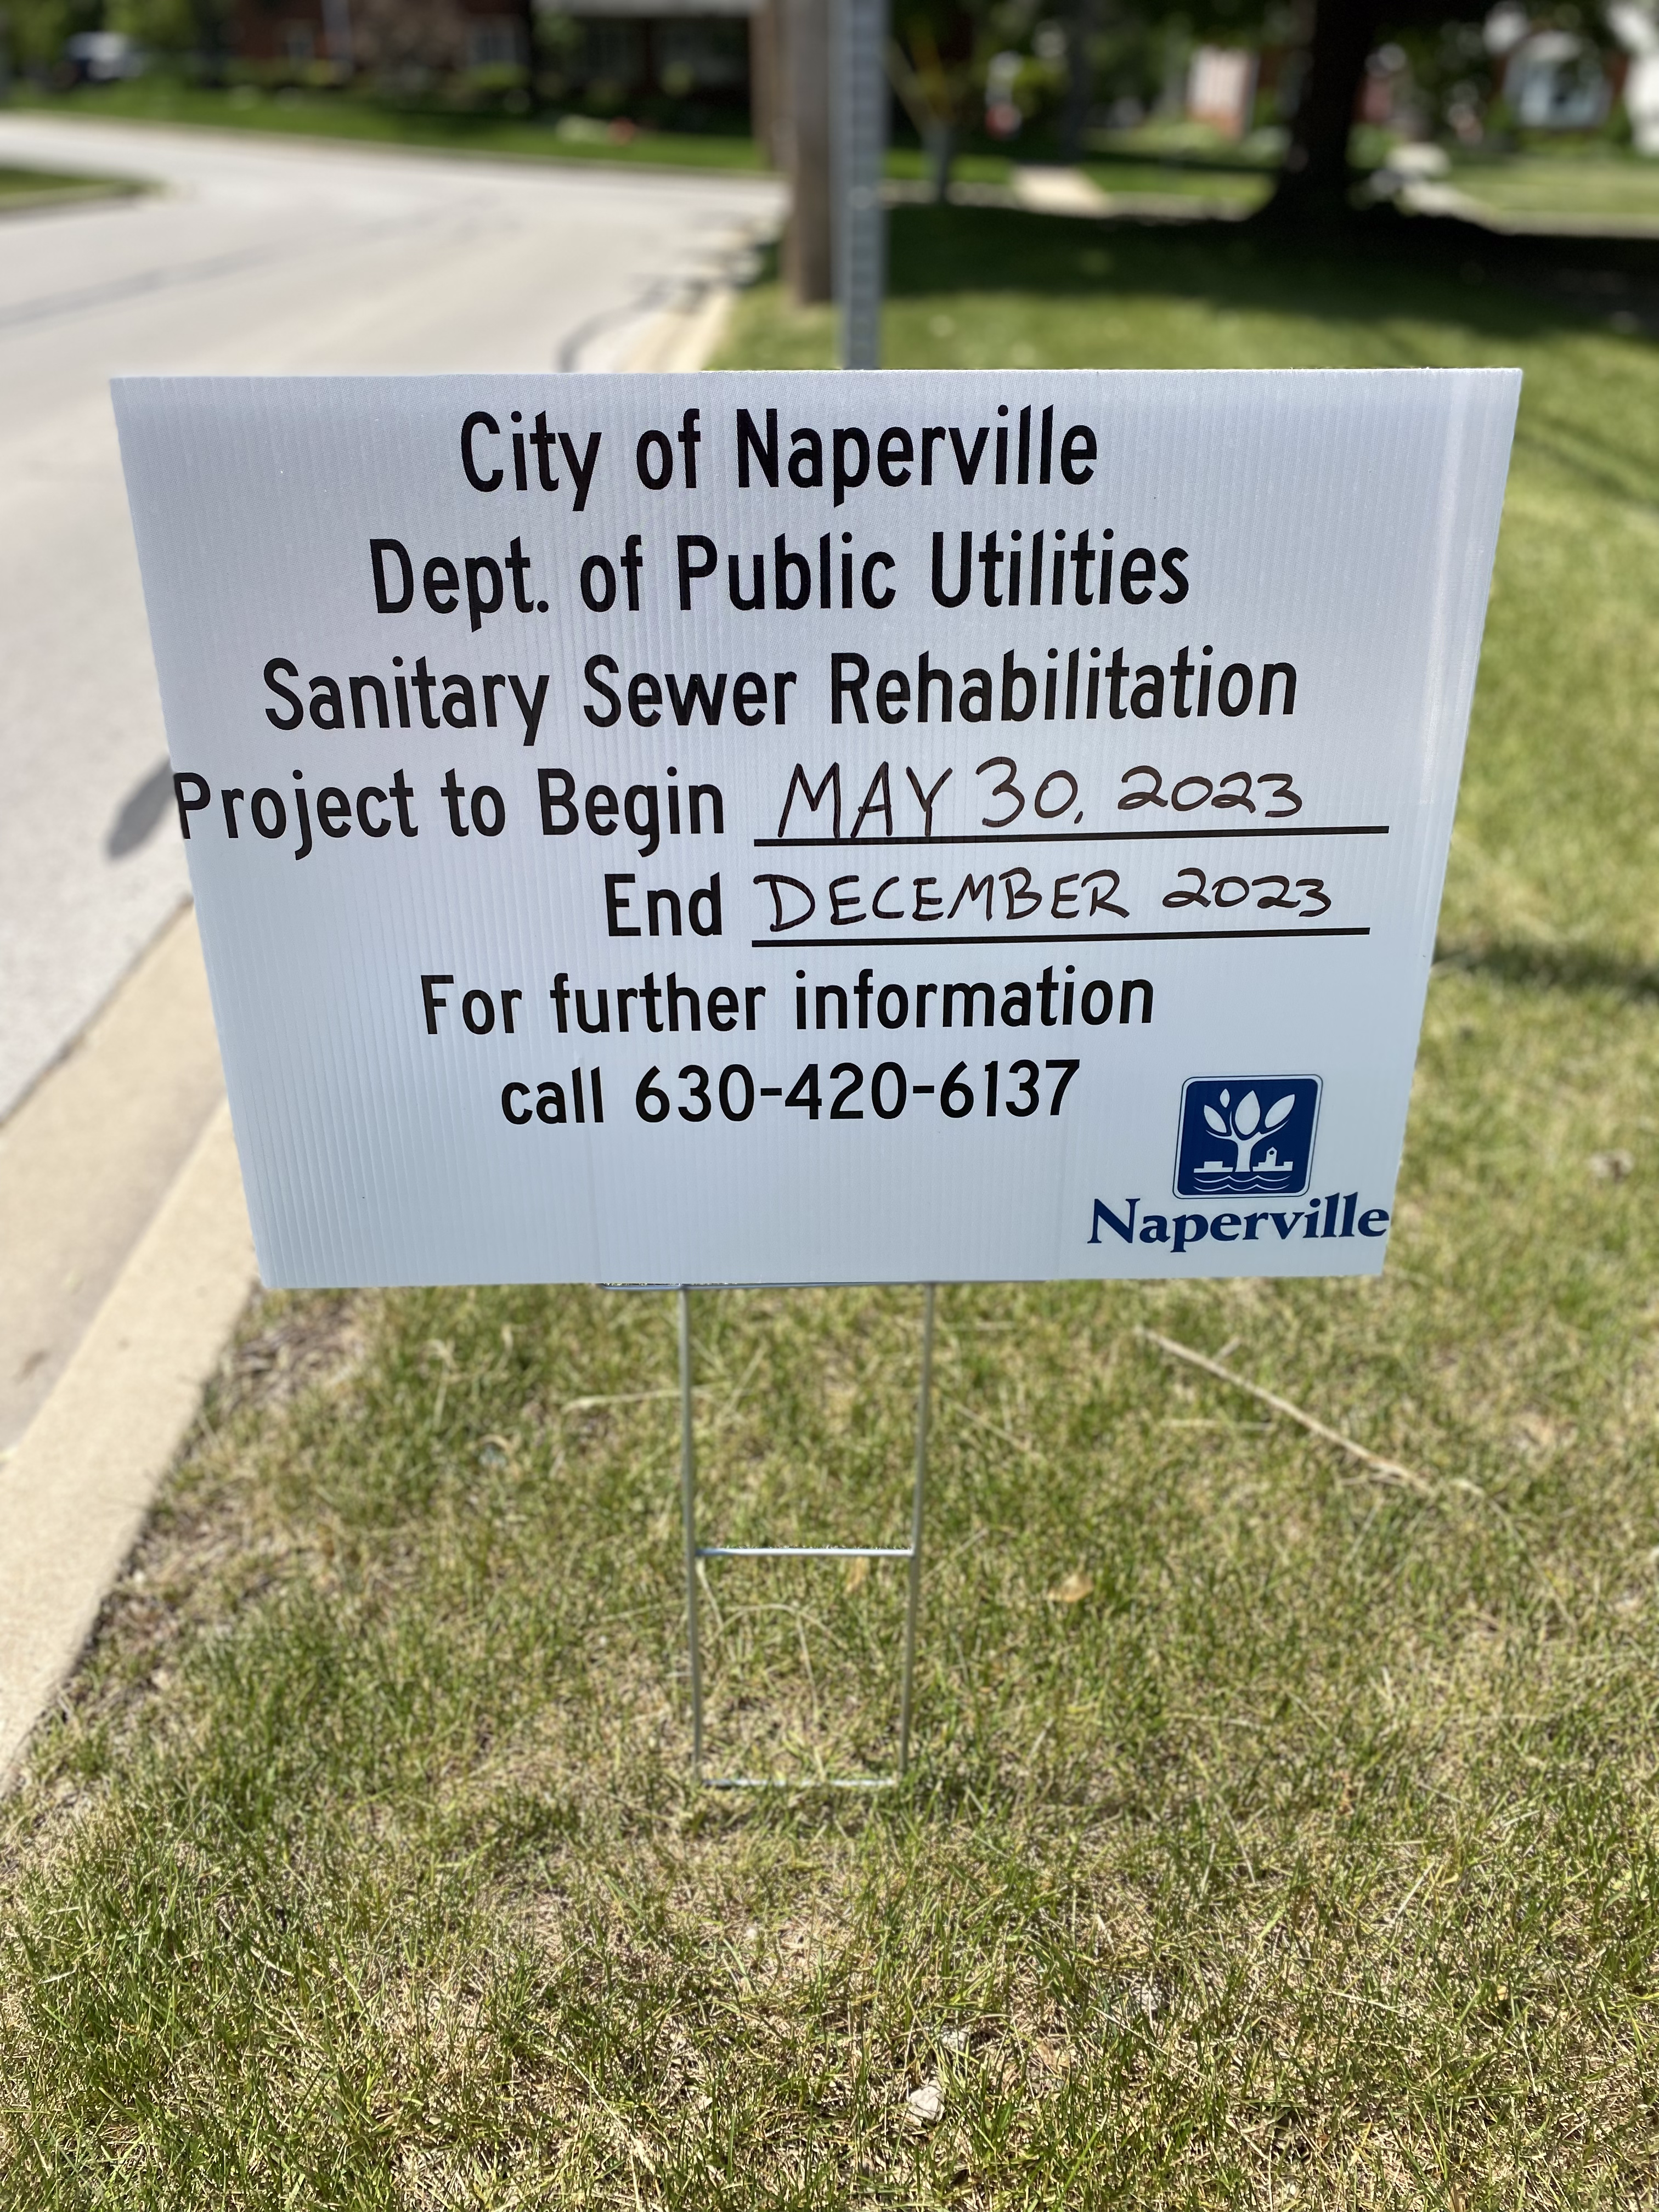 Crews placed this signage on the intersections in the work location area.